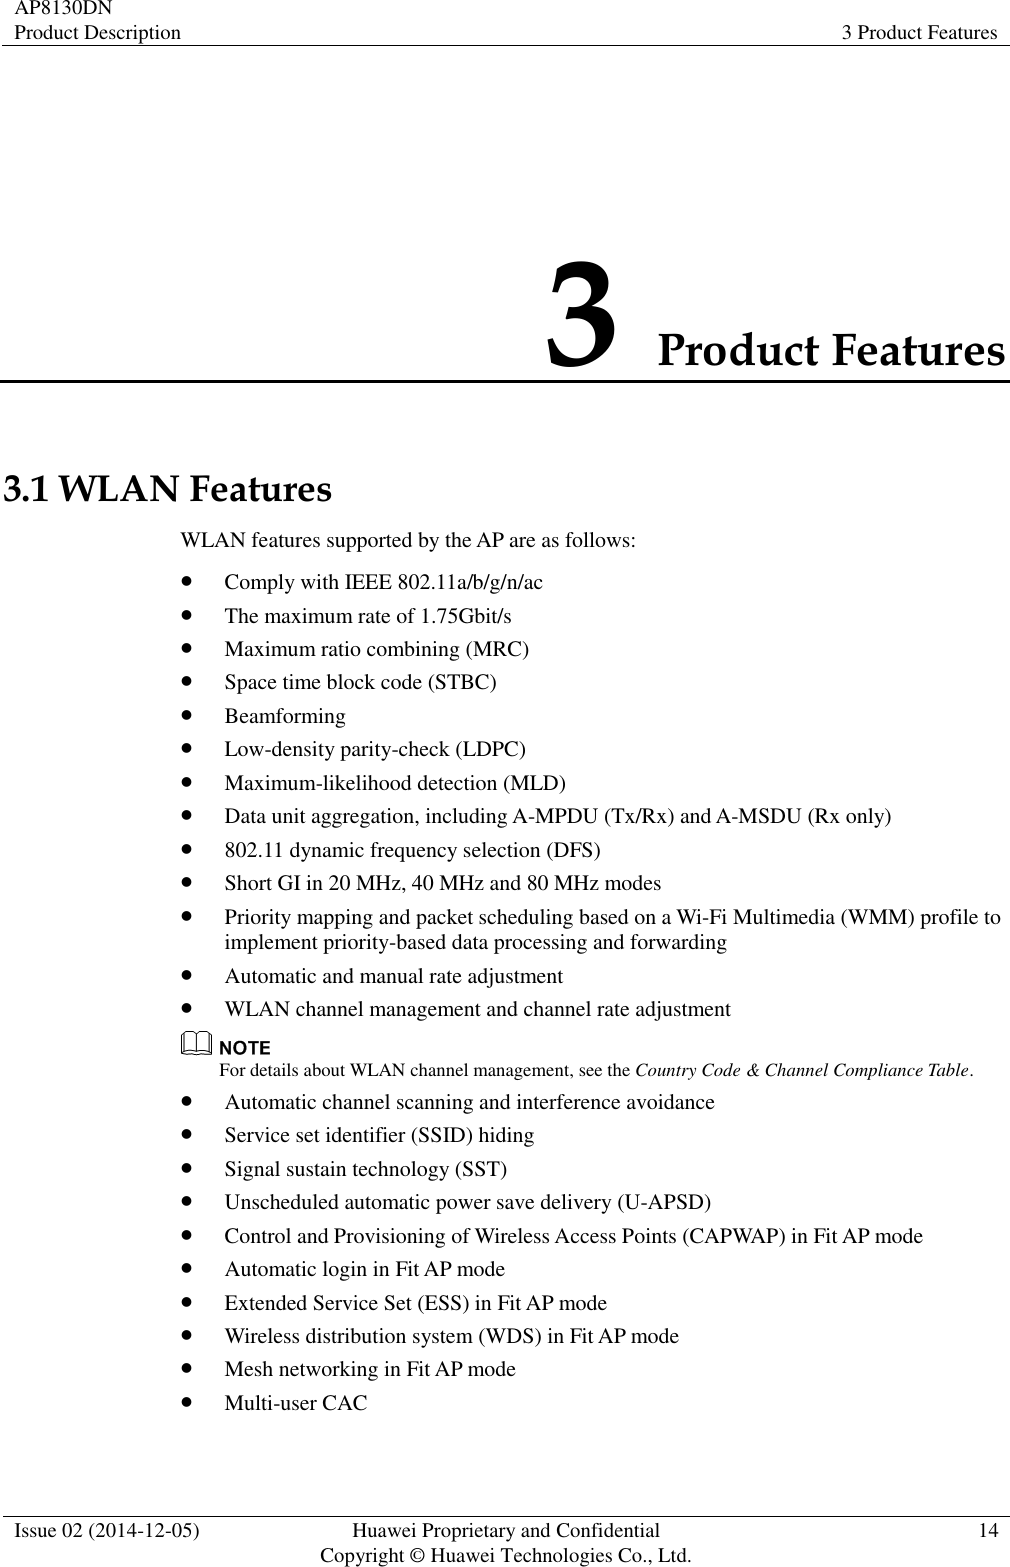 AP8130DN Product Description 3 Product Features  Issue 02 (2014-12-05) Huawei Proprietary and Confidential                                     Copyright © Huawei Technologies Co., Ltd. 14  3 Product Features 3.1 WLAN Features WLAN features supported by the AP are as follows:  Comply with IEEE 802.11a/b/g/n/ac  The maximum rate of 1.75Gbit/s  Maximum ratio combining (MRC)  Space time block code (STBC)  Beamforming  Low-density parity-check (LDPC)  Maximum-likelihood detection (MLD)  Data unit aggregation, including A-MPDU (Tx/Rx) and A-MSDU (Rx only)  802.11 dynamic frequency selection (DFS)  Short GI in 20 MHz, 40 MHz and 80 MHz modes  Priority mapping and packet scheduling based on a Wi-Fi Multimedia (WMM) profile to implement priority-based data processing and forwarding  Automatic and manual rate adjustment  WLAN channel management and channel rate adjustment  For details about WLAN channel management, see the Country Code &amp; Channel Compliance Table.  Automatic channel scanning and interference avoidance  Service set identifier (SSID) hiding  Signal sustain technology (SST)  Unscheduled automatic power save delivery (U-APSD)  Control and Provisioning of Wireless Access Points (CAPWAP) in Fit AP mode  Automatic login in Fit AP mode  Extended Service Set (ESS) in Fit AP mode  Wireless distribution system (WDS) in Fit AP mode  Mesh networking in Fit AP mode  Multi-user CAC 